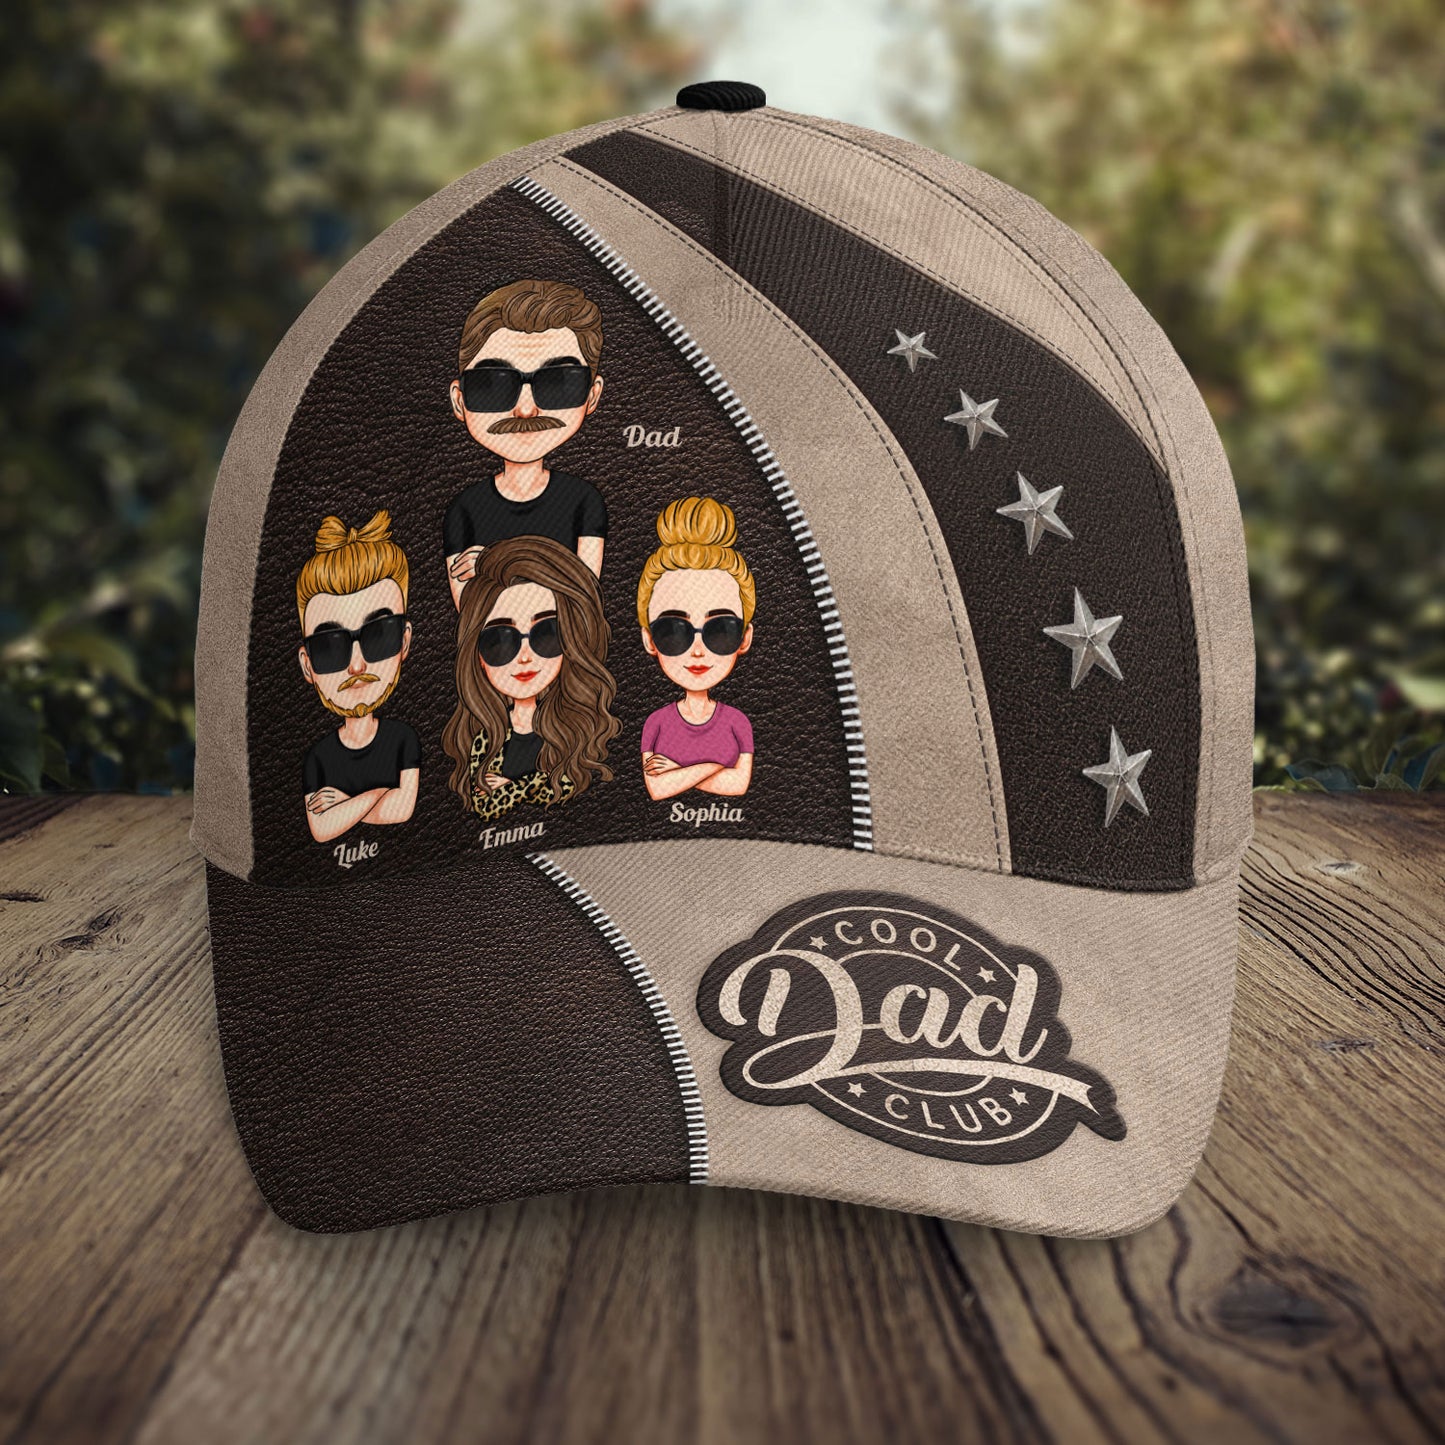 Cool Dad Club Father's Day Gifts - Personalized Classic Cap